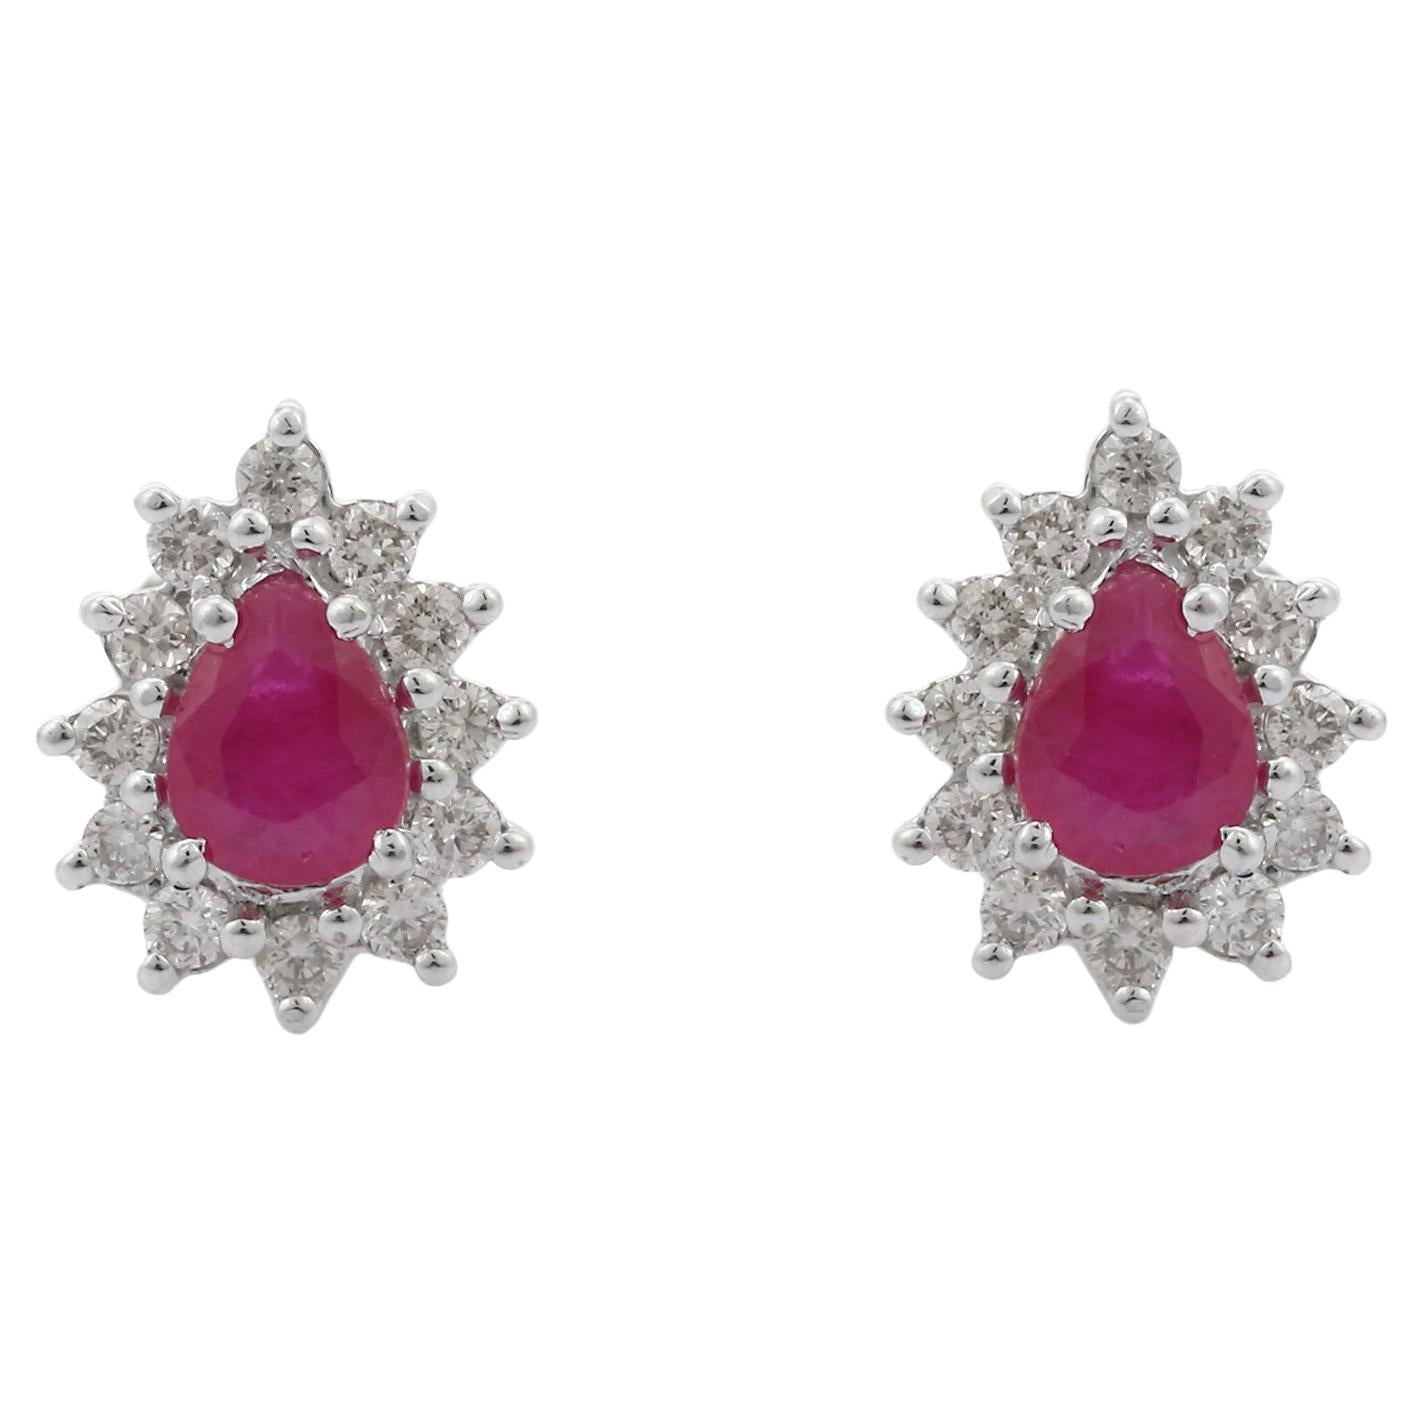 14K Solid White Gold Alluring Dainty Diamond Ruby Stud Earrings For Her 